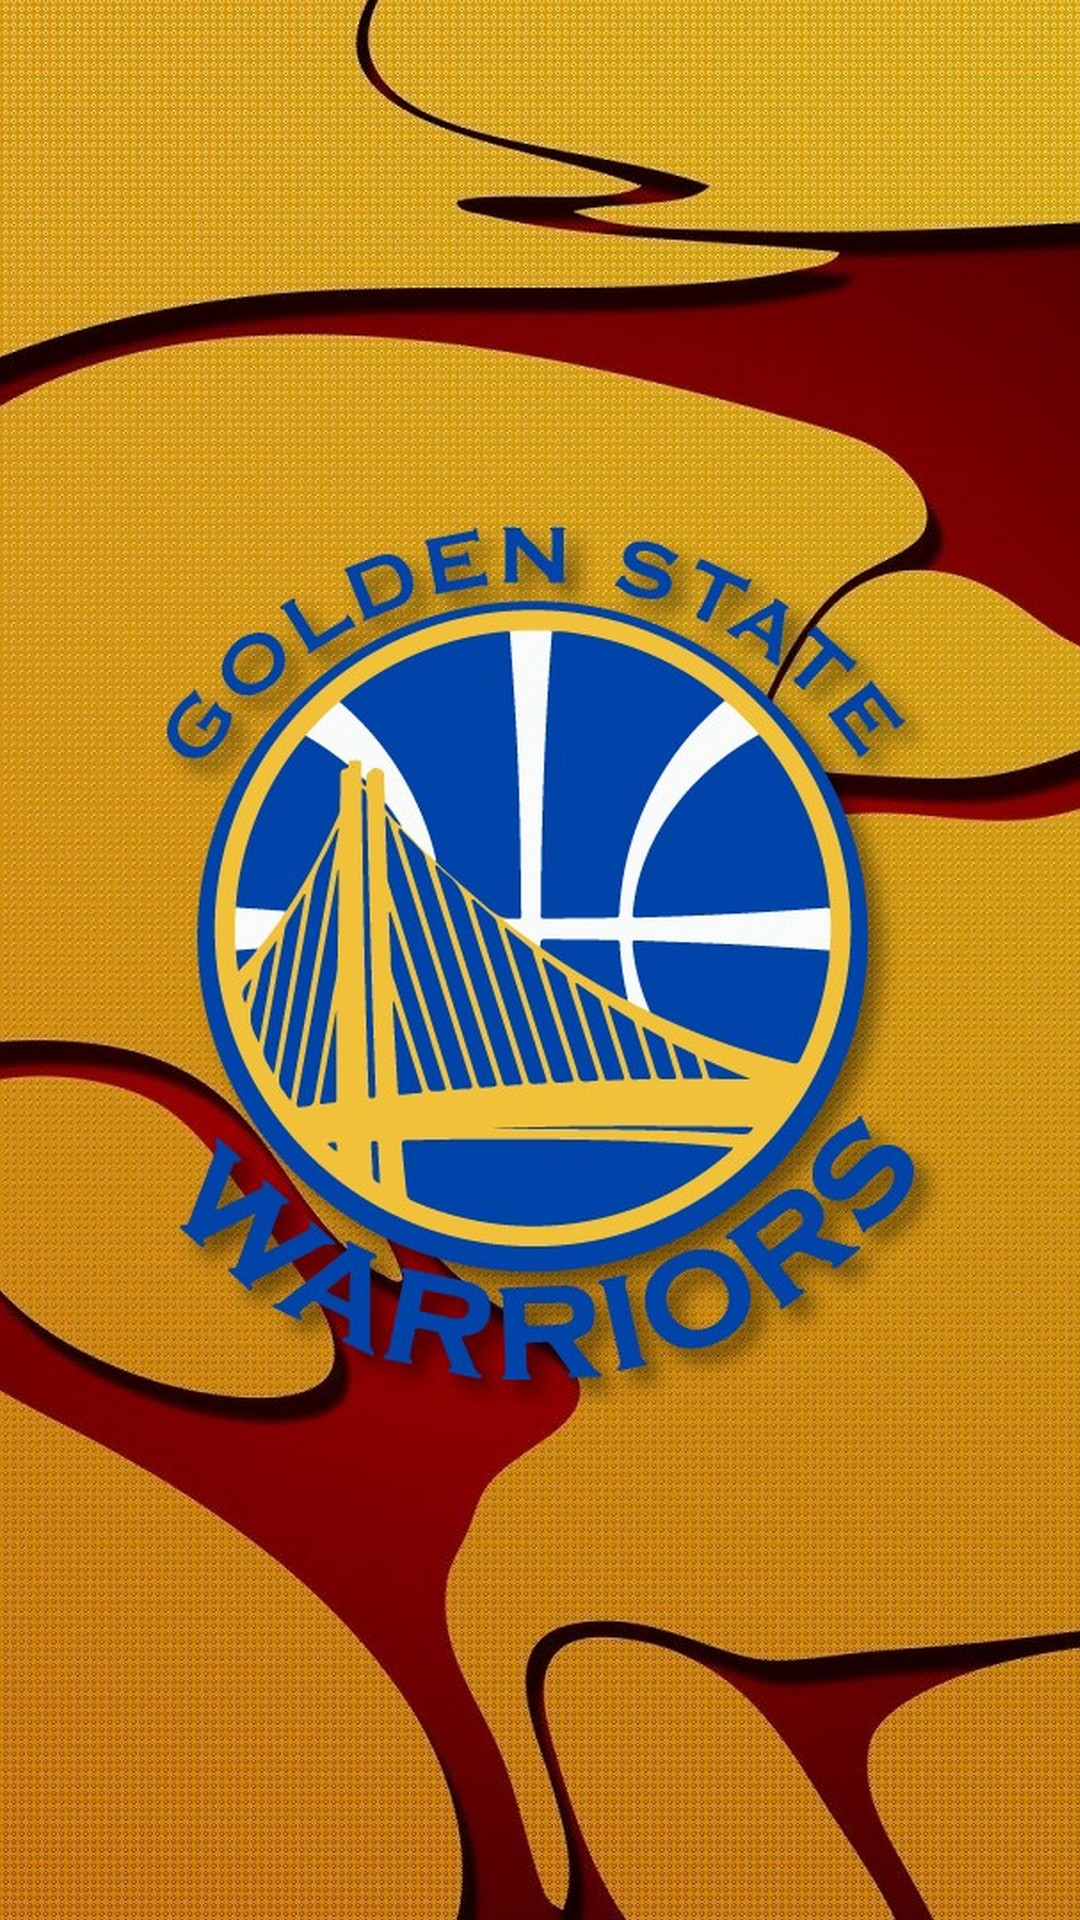 Android Wallpaper HD Golden State Warriors with image resolution 1080x1920 pixel. You can make this wallpaper for your Android backgrounds, Tablet, Smartphones Screensavers and Mobile Phone Lock Screen